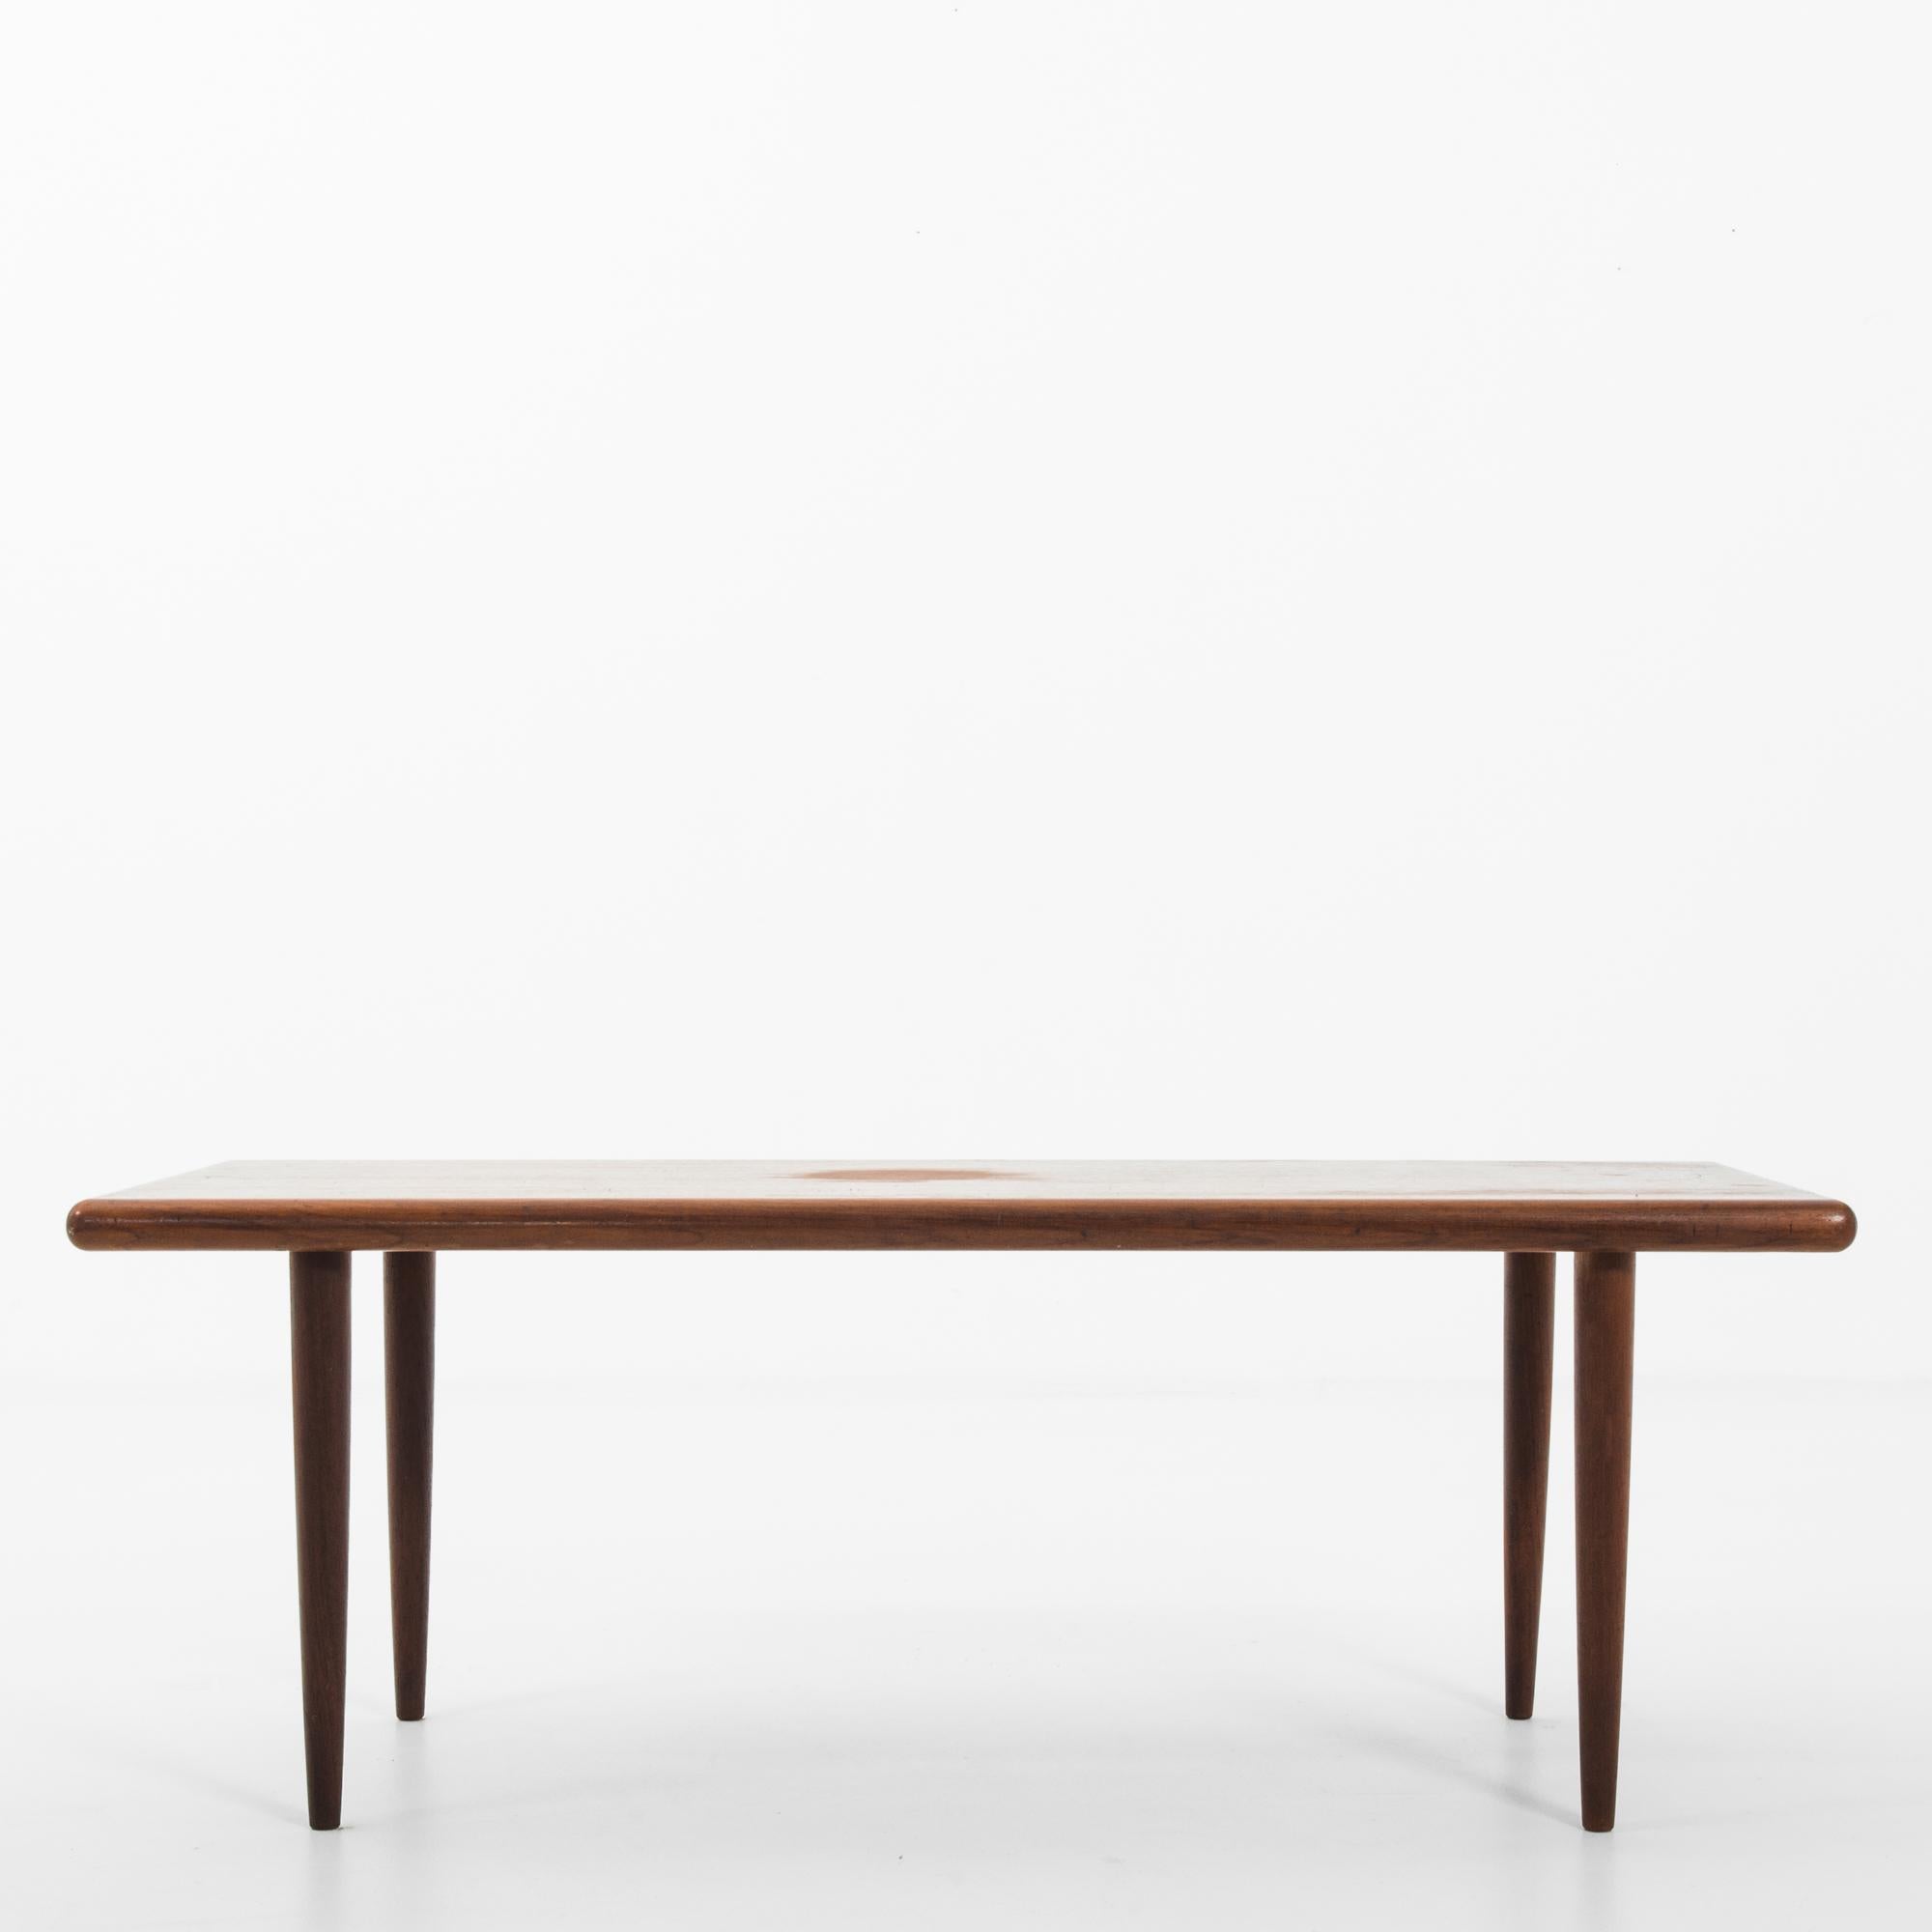 A teak coffee table from Denmark, circa 1960. With its bold, curving lines and combination of glass on top rich, dark wood, this table is classic Scandinavian modern. Chic, sleek and practical, this table is waiting to host all the art and travel